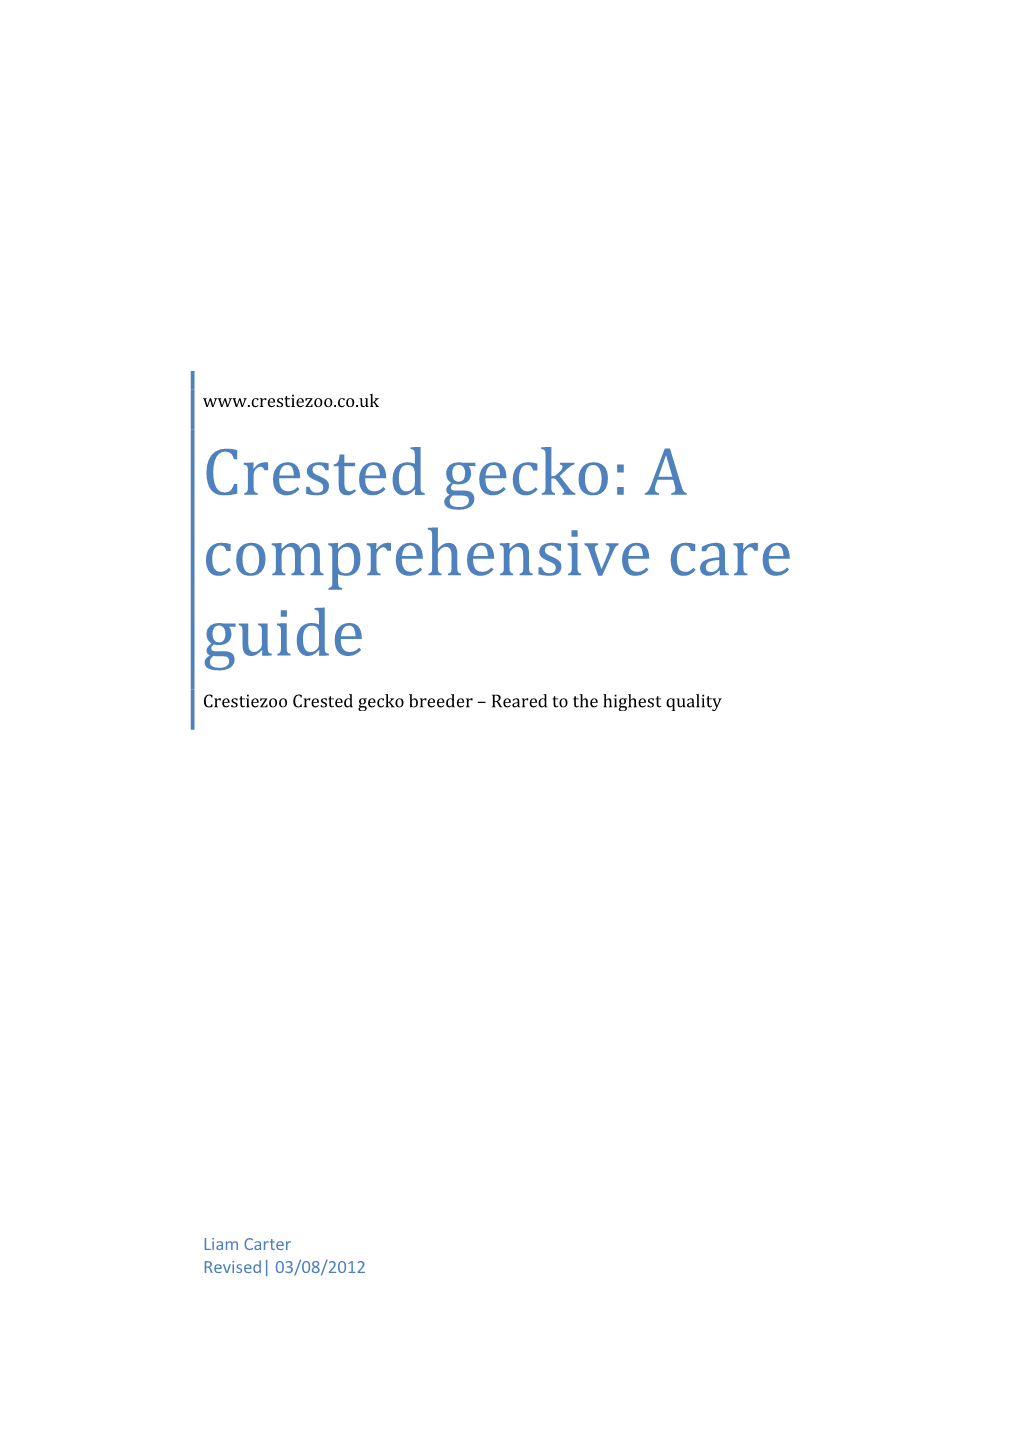 Crested Gecko: a Comprehensive Care Guide